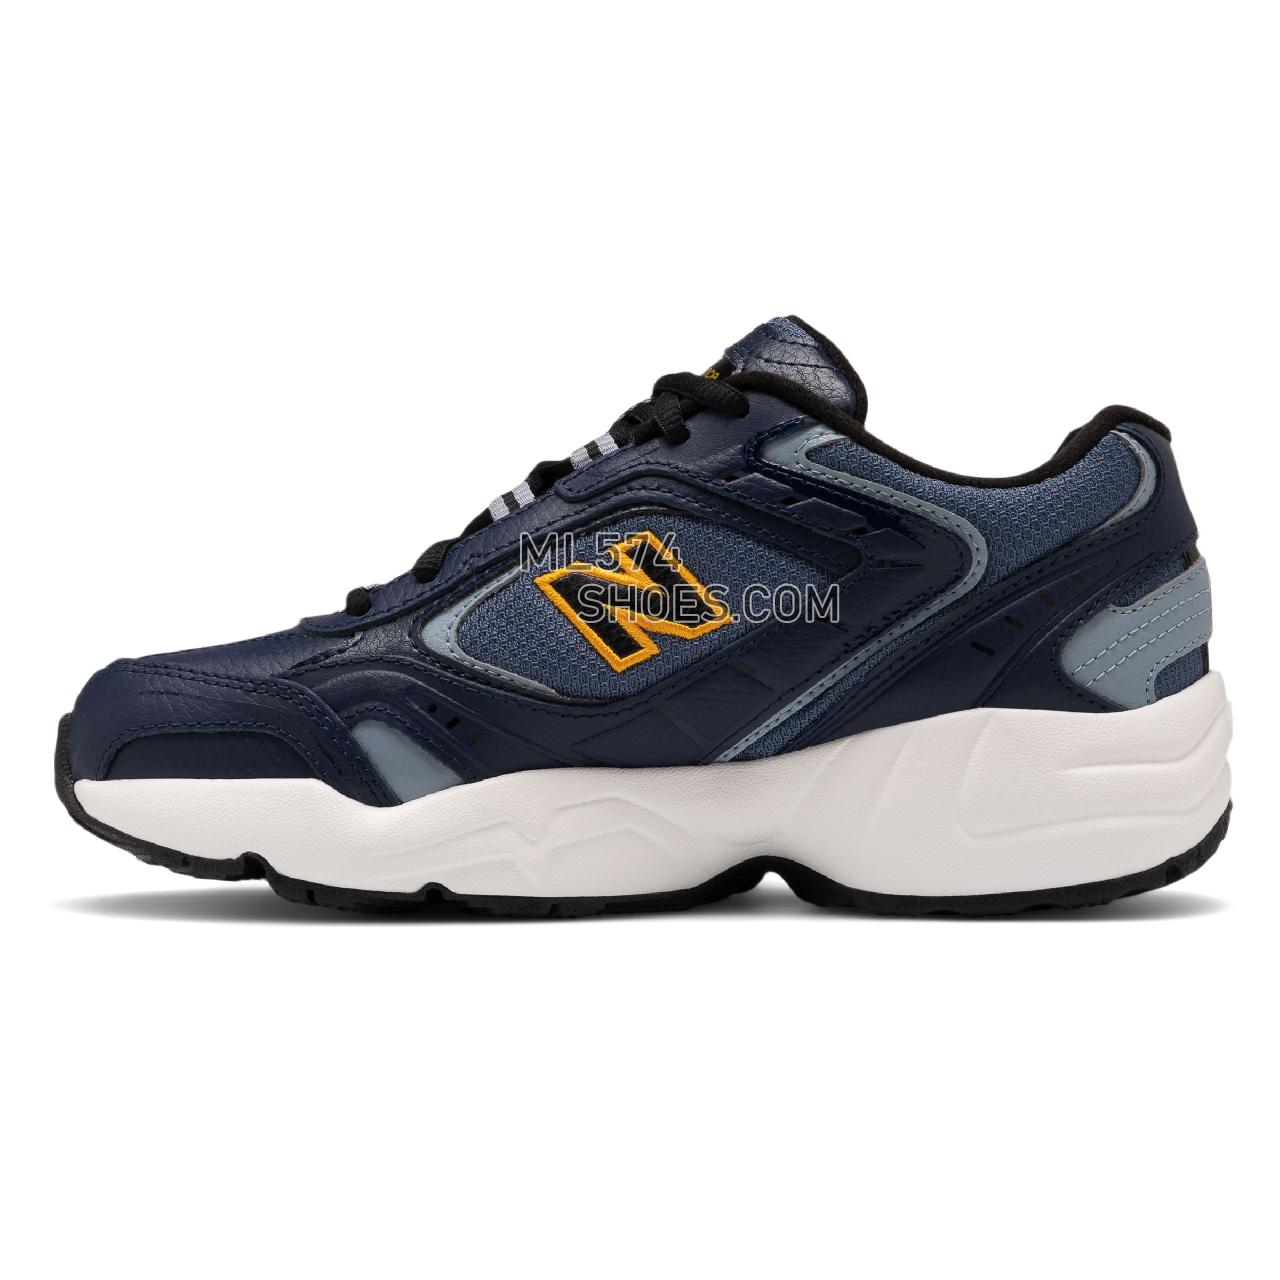 New Balance 452 - Women's 452 Training - Pigment with Vintage Indigo and Gold Rush - WX452SW